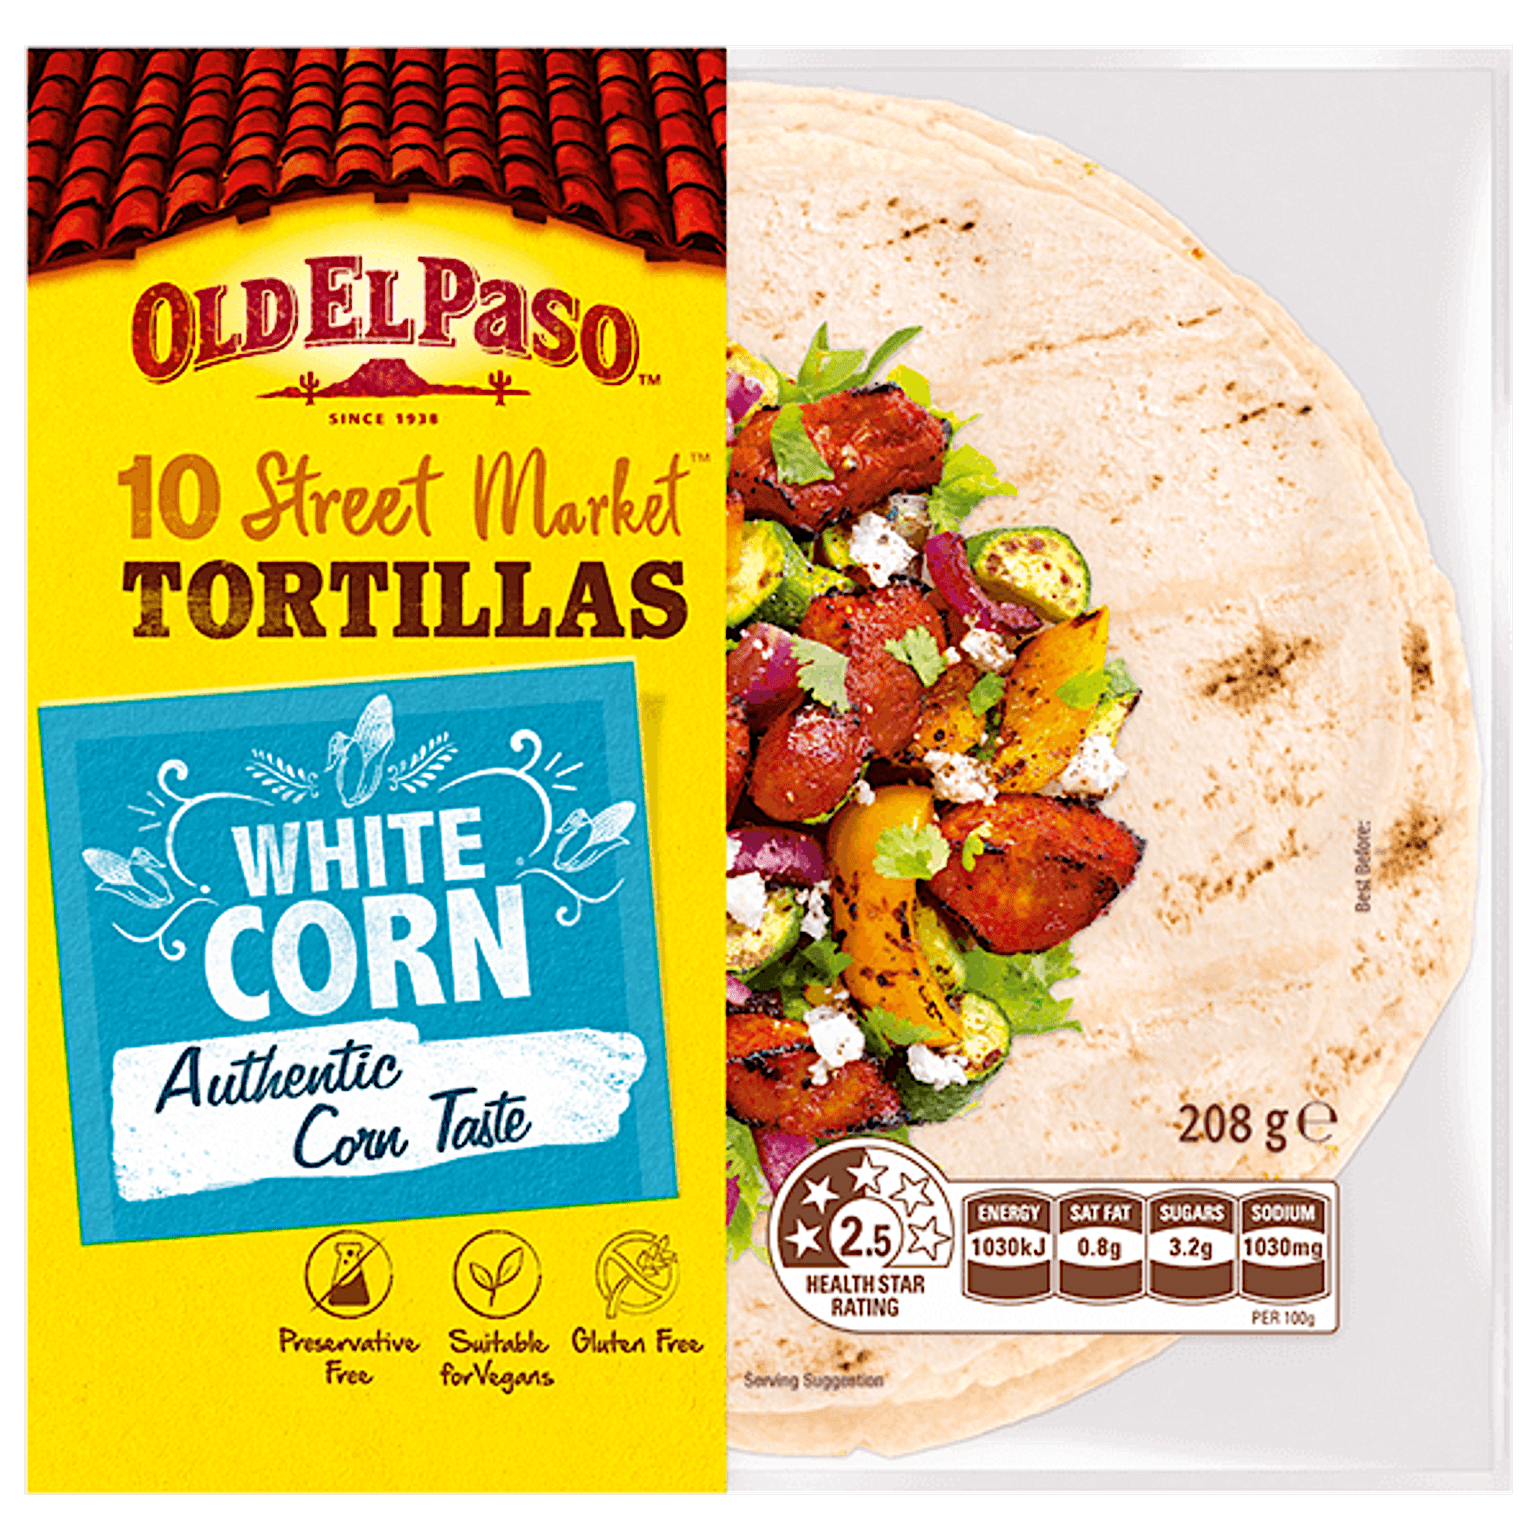 a pack of Old El Paso's 10 street market white corn tortillas (208g)